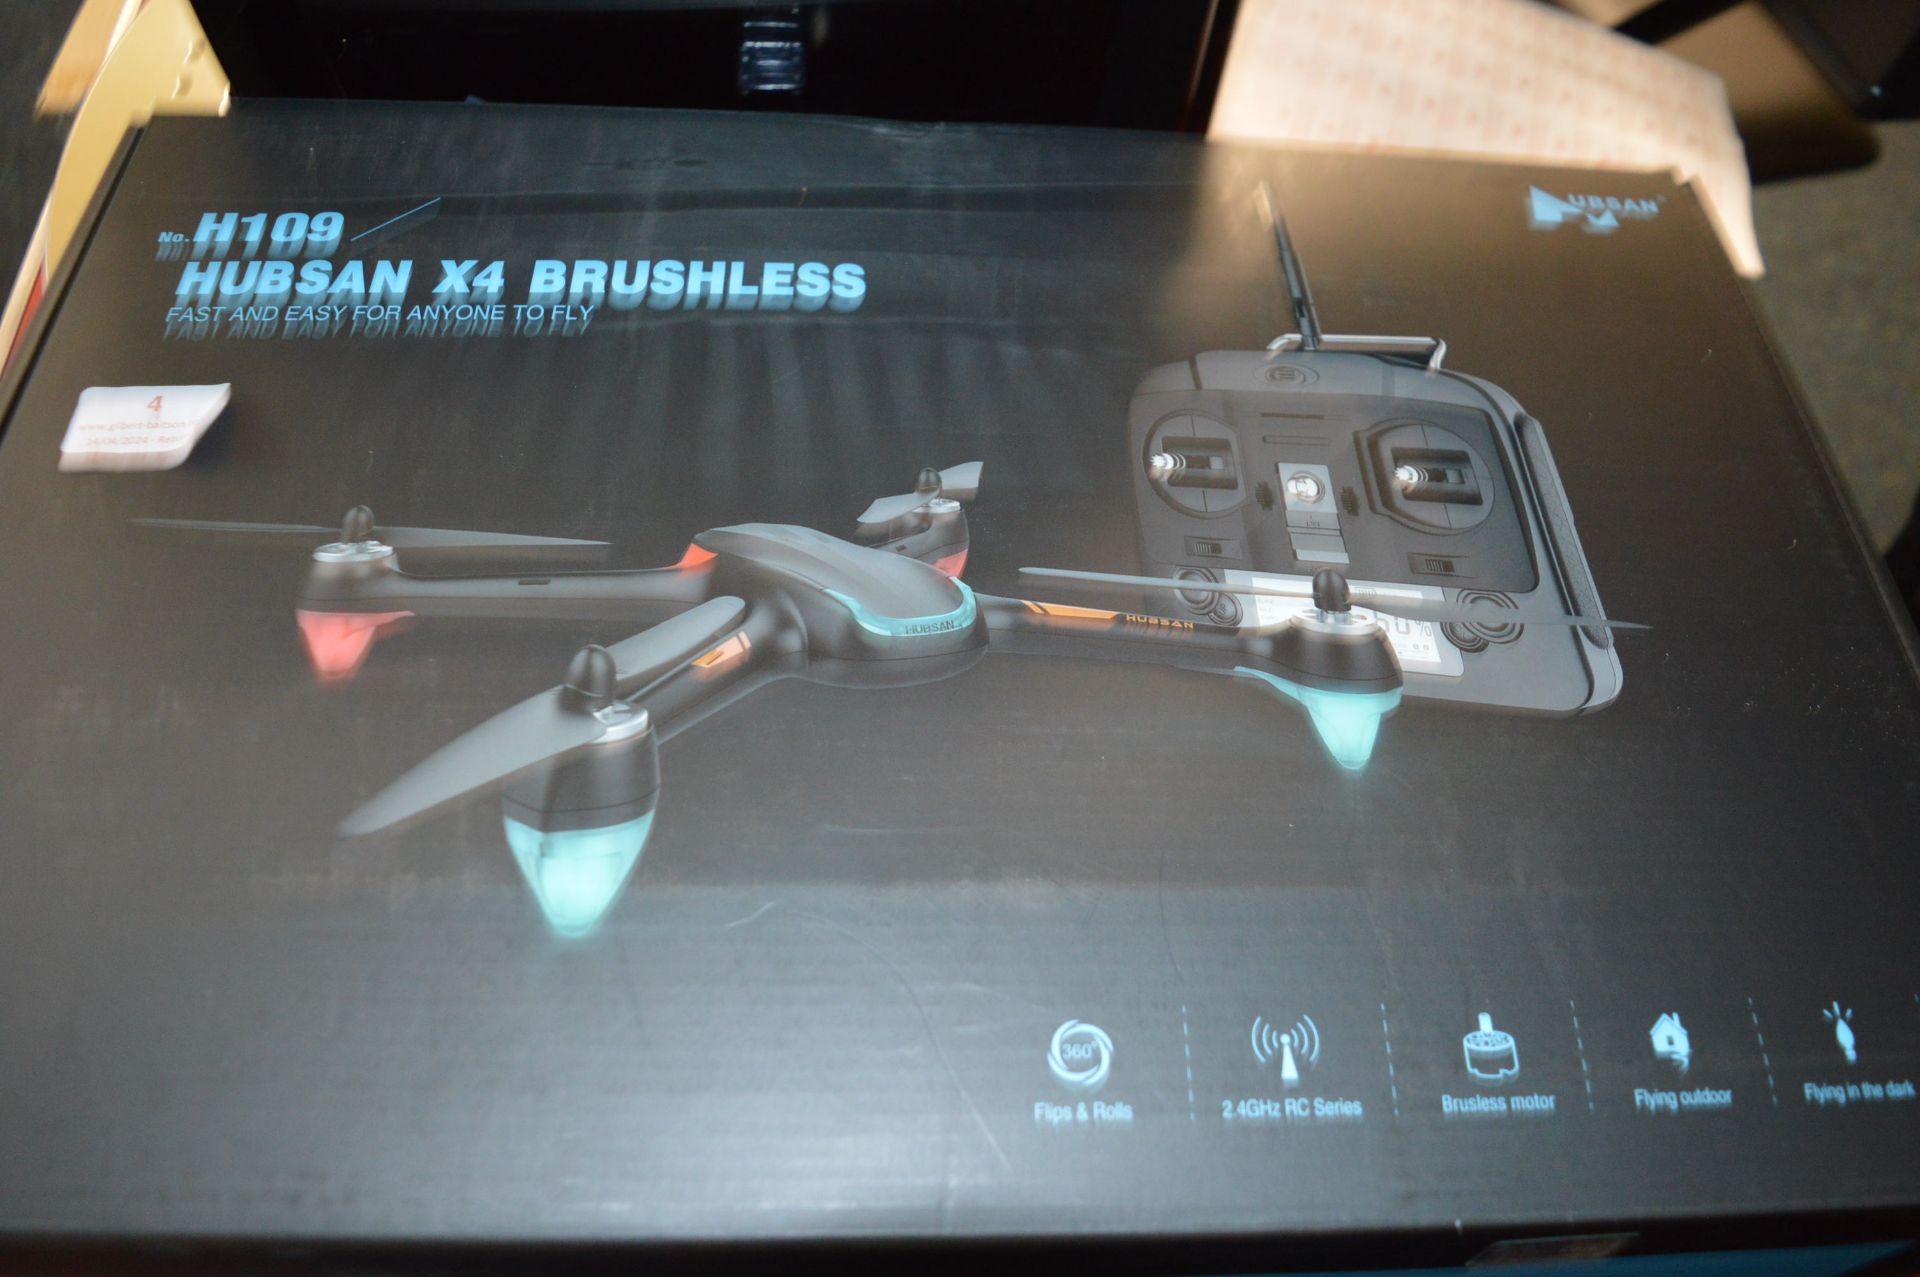 *Hubson X4 Brushless Drone